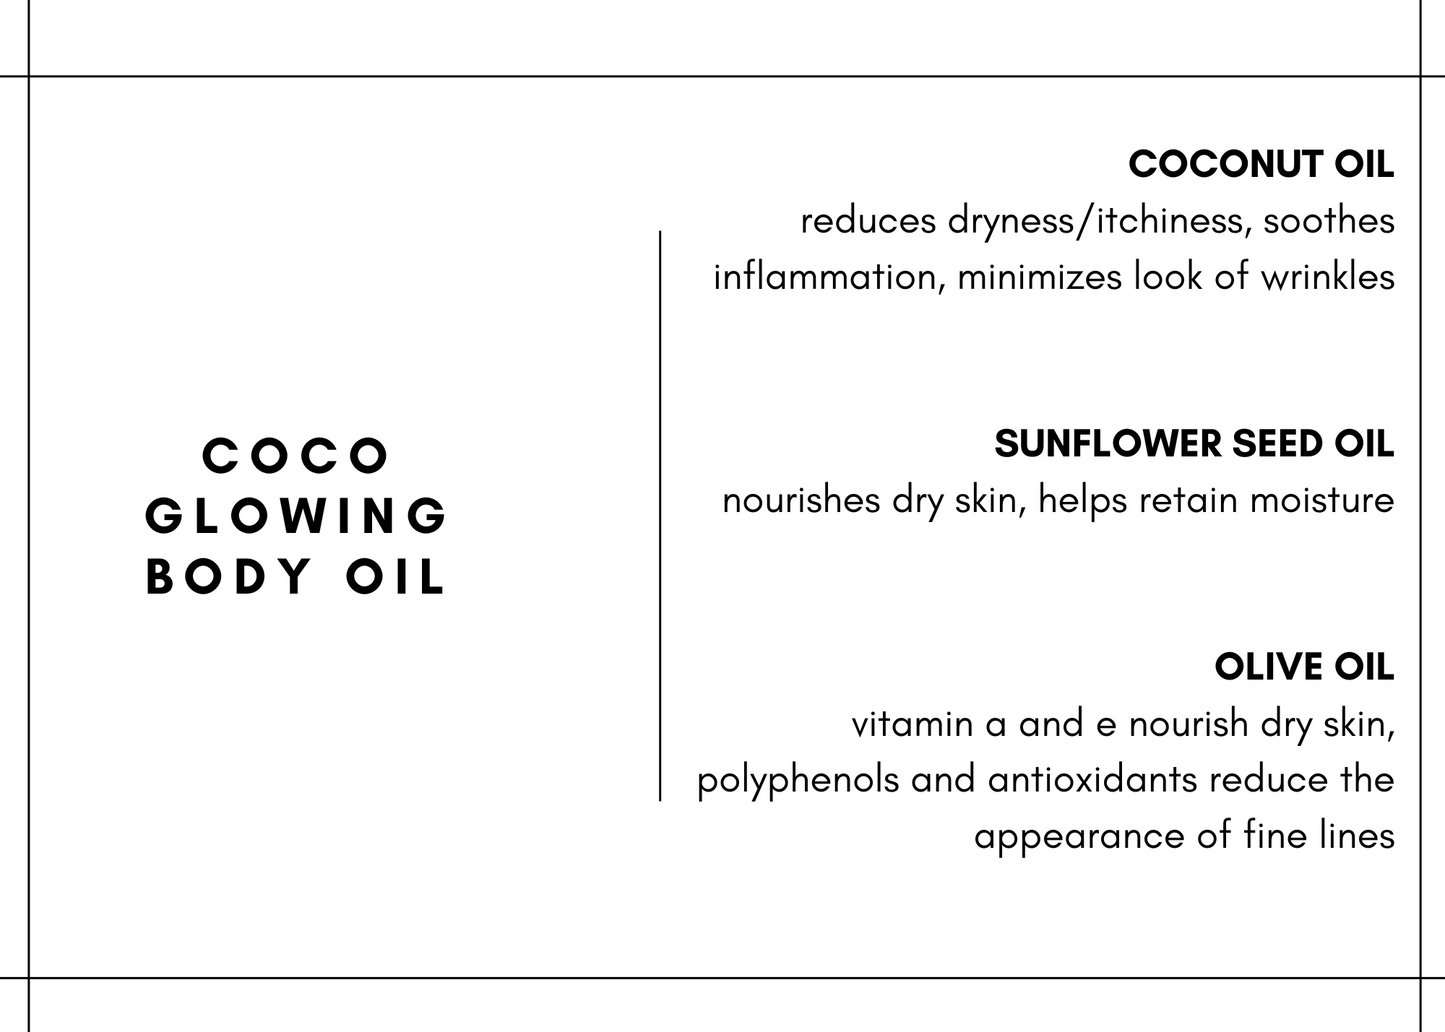 Coco Glowing Body Oil